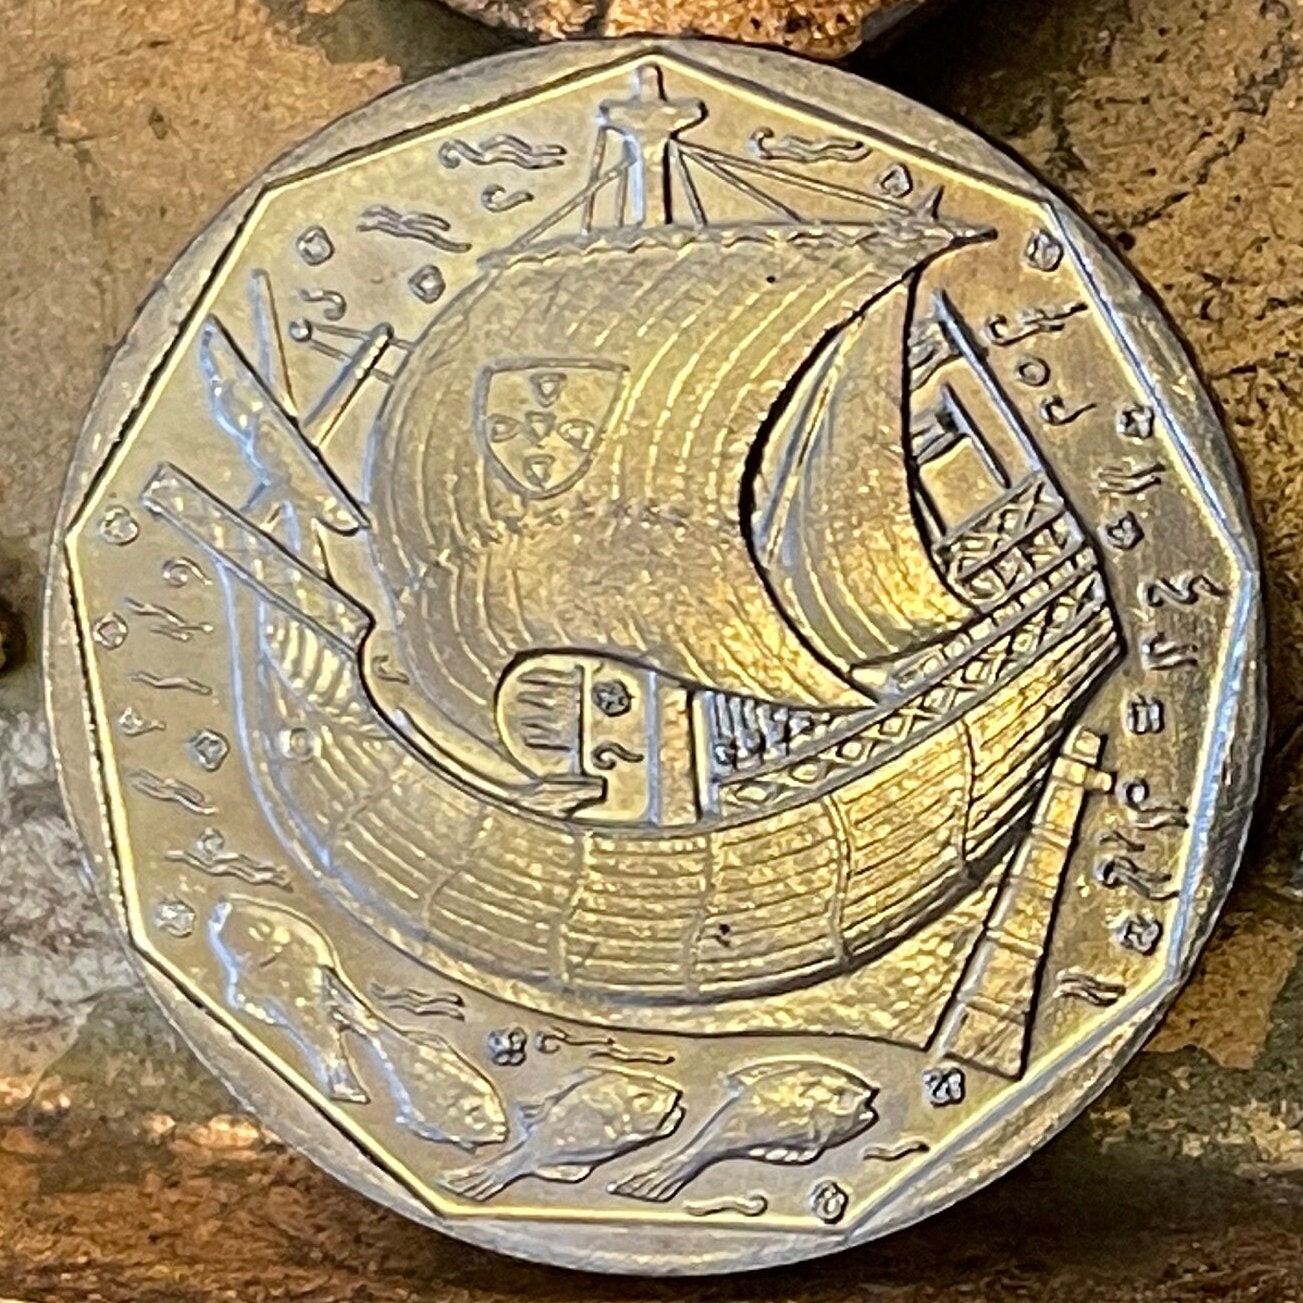 Caravel Ship & Cod Fish 50 Escudos Portugal Authentic Coin Money for Jewelry and Craft Making (Fishing Boat)